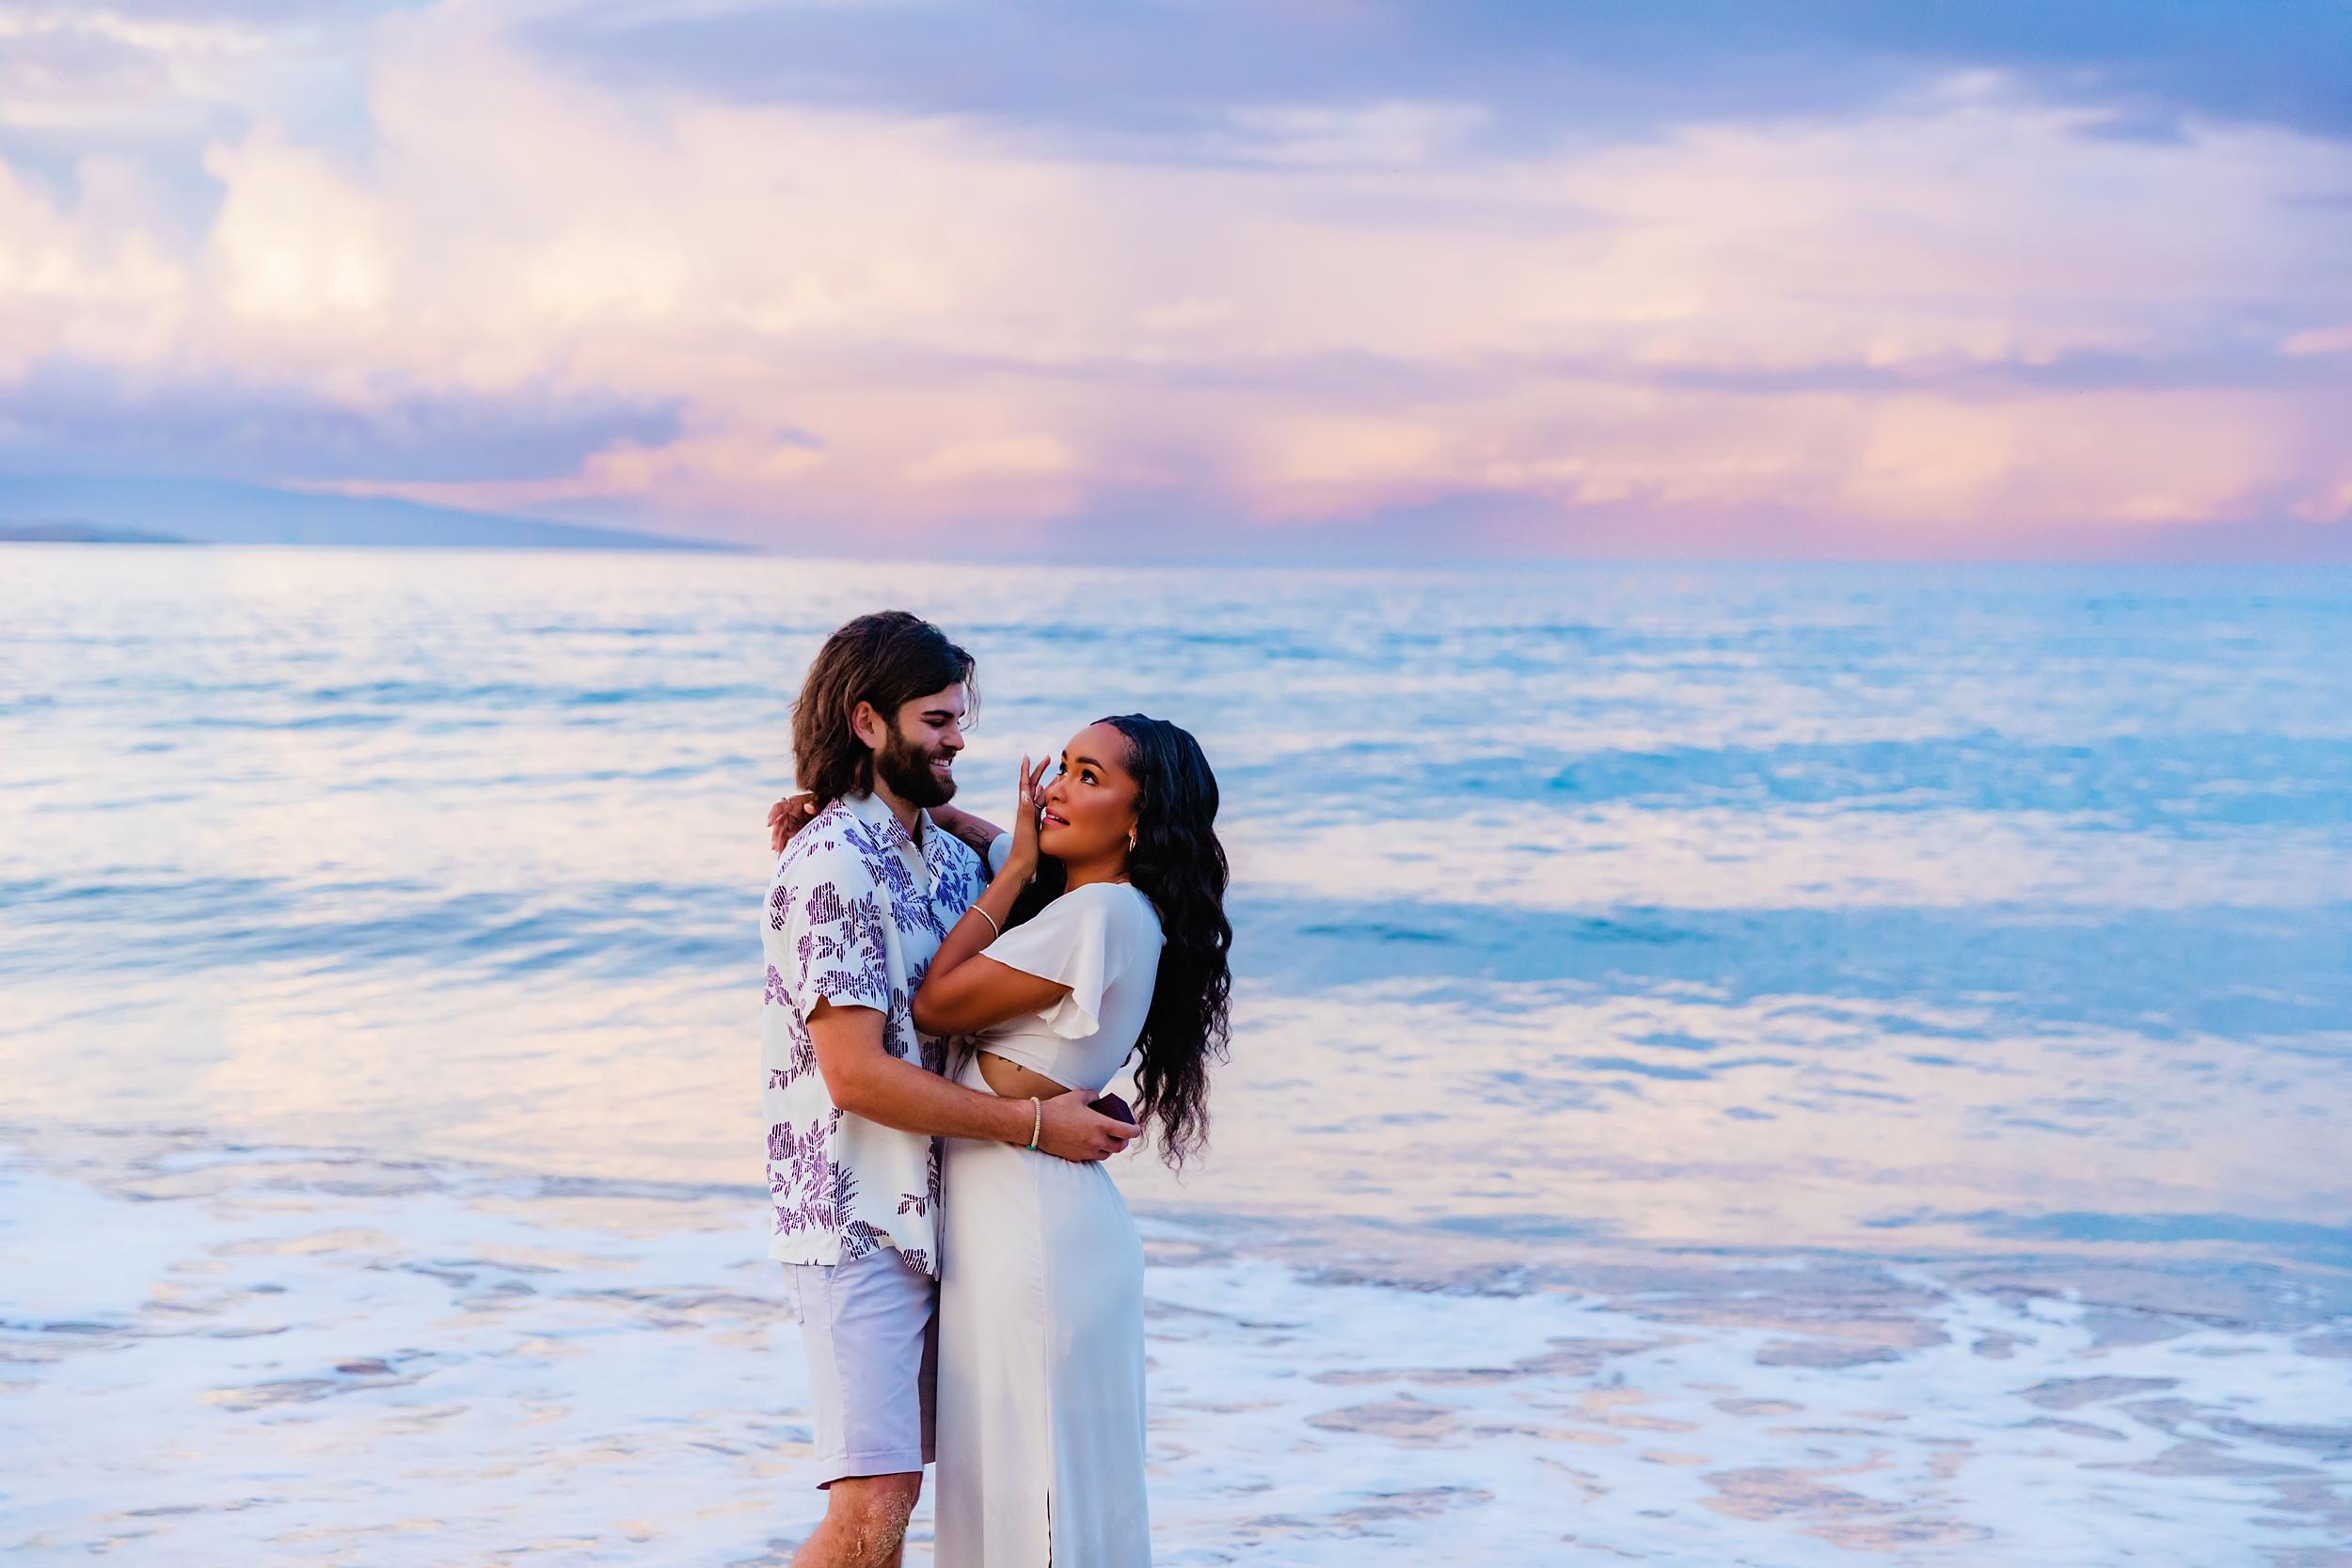 Woman with long black wavy hair and white dress wipes a tear from her eye after her boyfriend proposes to her at sunrise in Hawaii. Boyfriend has beard and patterned white shirt and smiles while he embrases her.